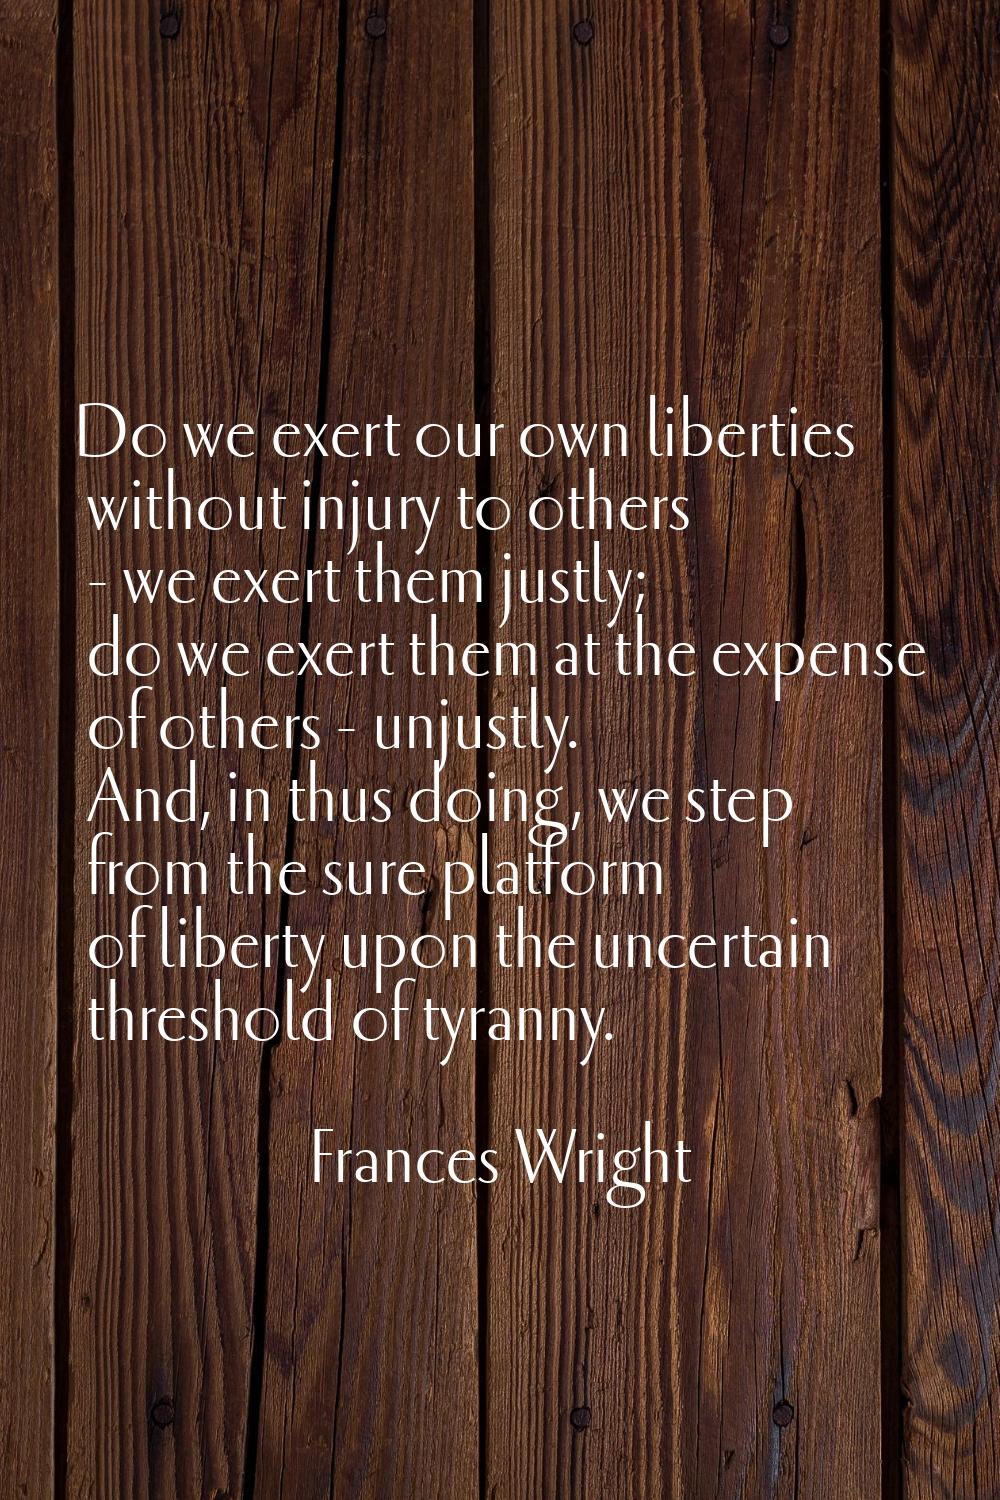 Do we exert our own liberties without injury to others - we exert them justly; do we exert them at 